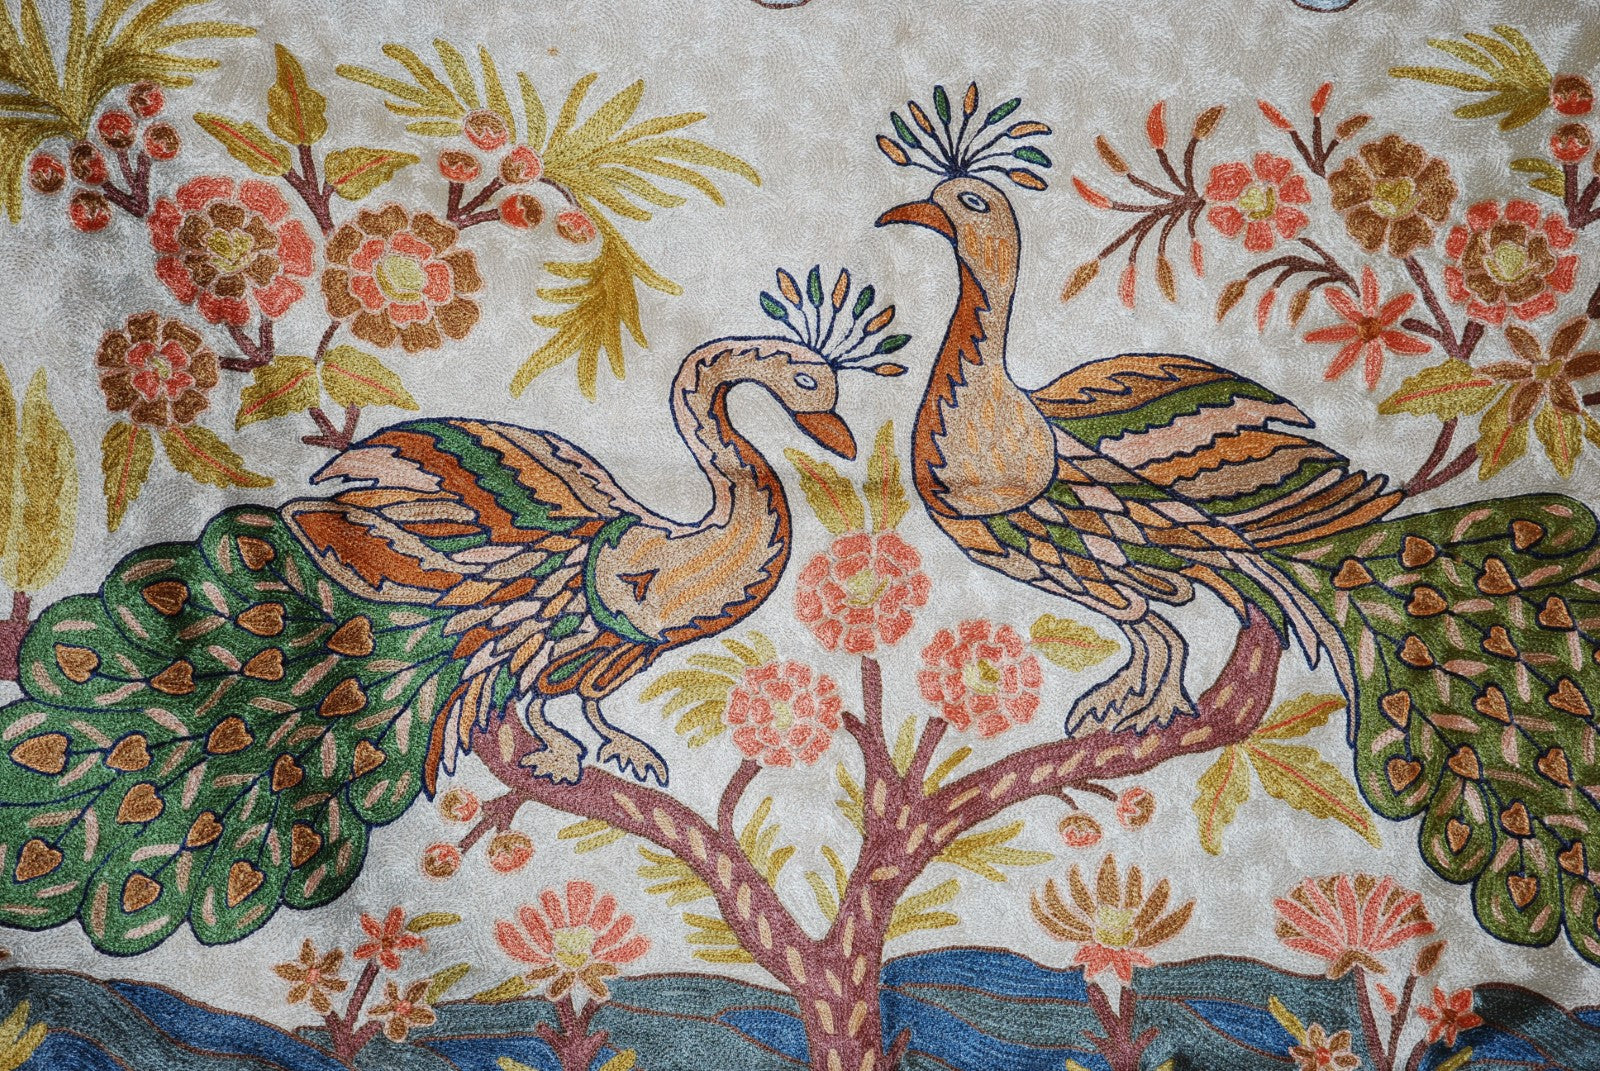 ChainStitch Tapestry Silk Area Rug Peacocks, Multicolor Embroidery 2.5x4 feet #CWR10115